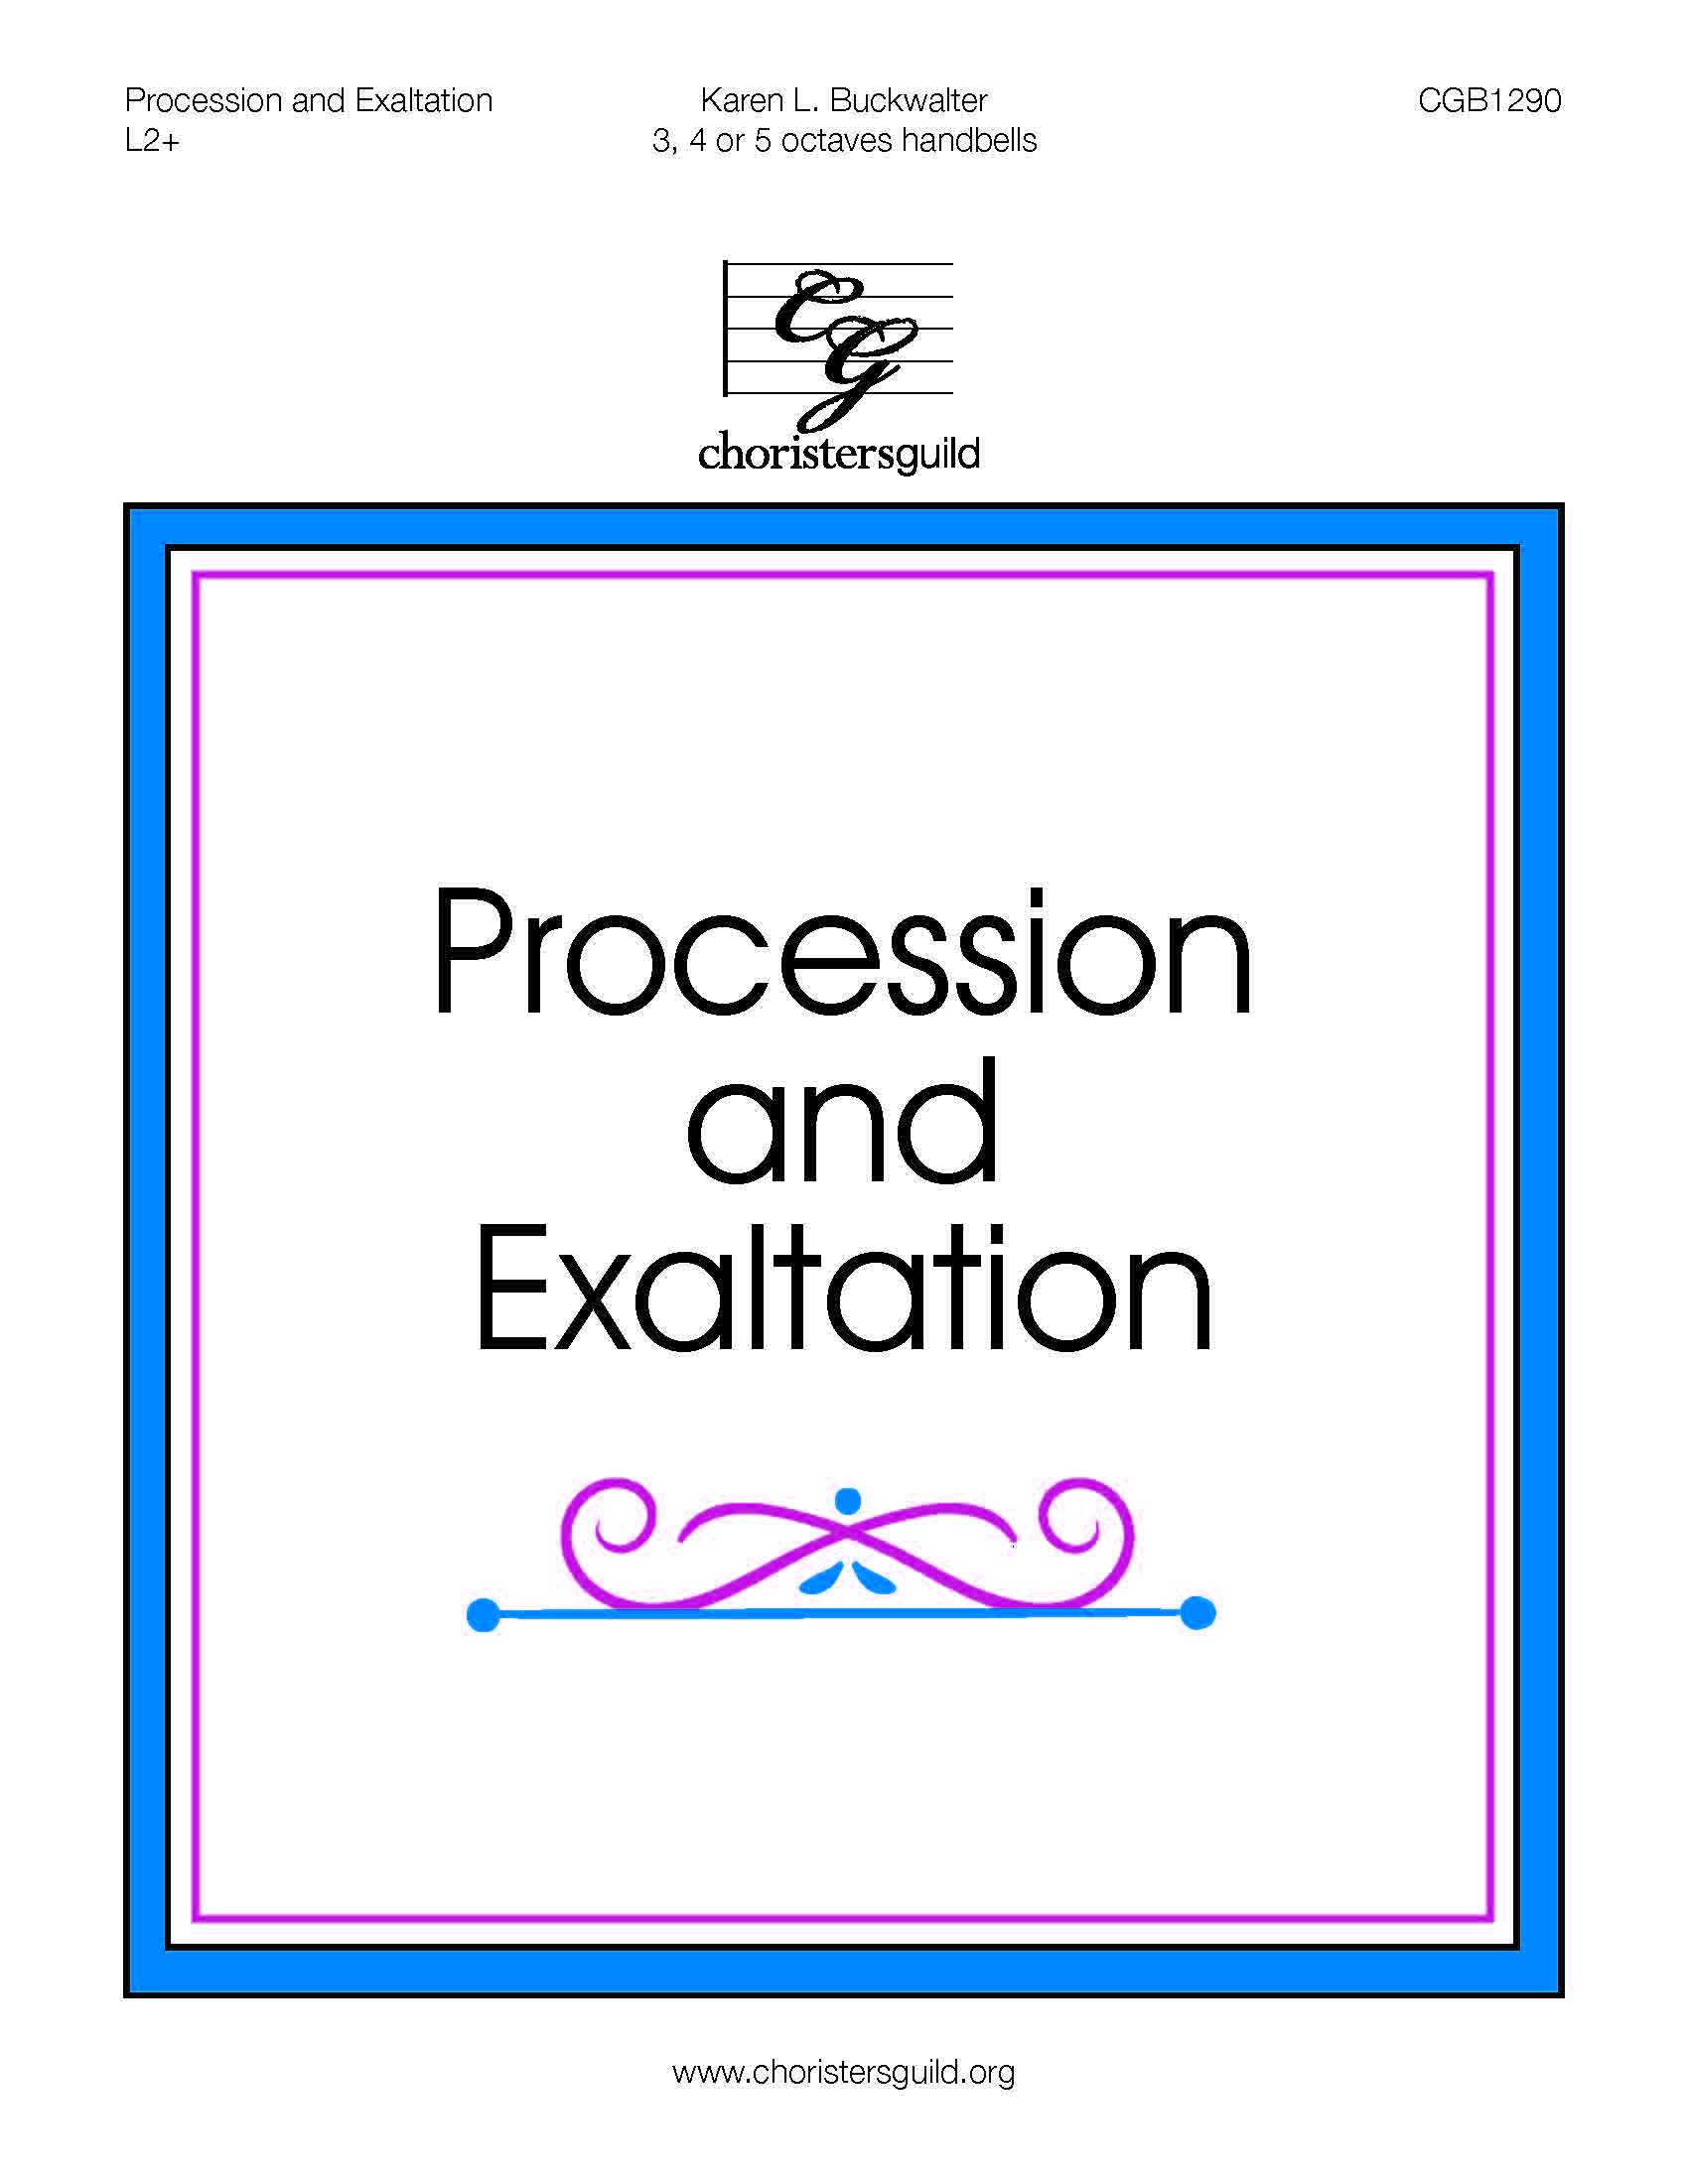 Procession and Exaltation